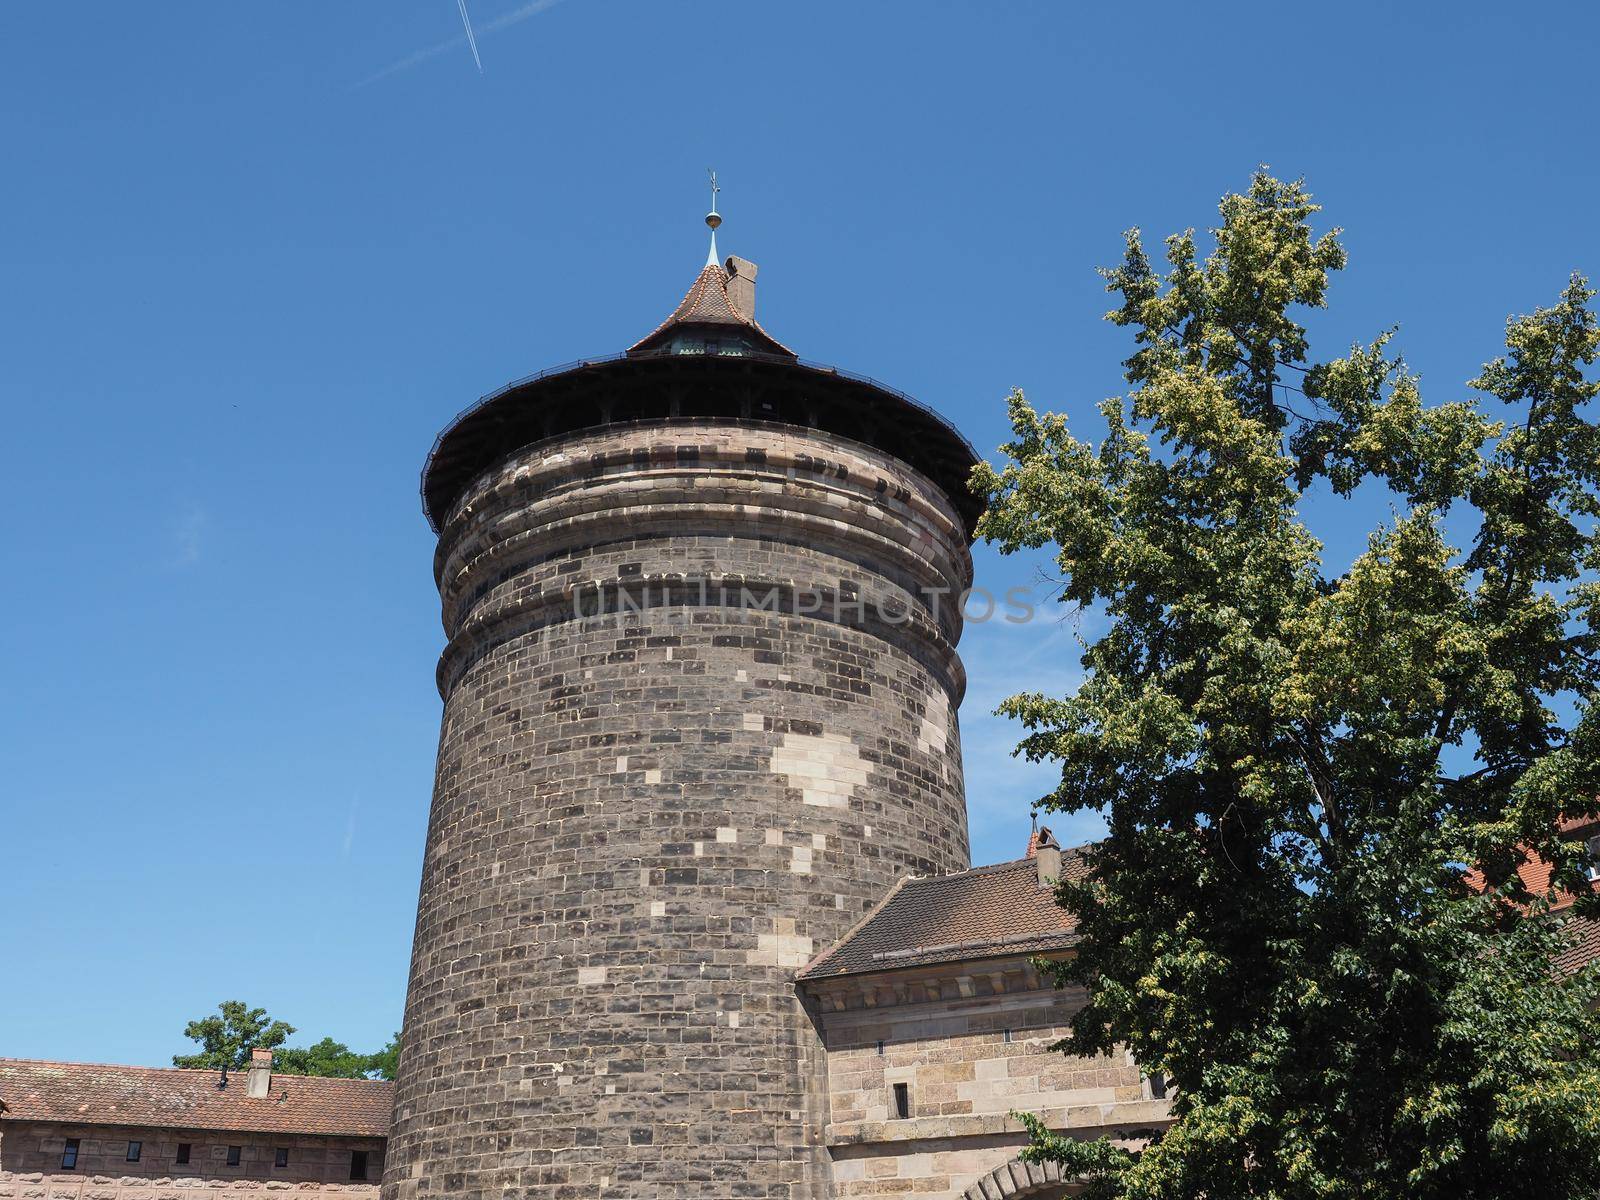 Spittlertor tower in the city walls in Nuernberg, Germany